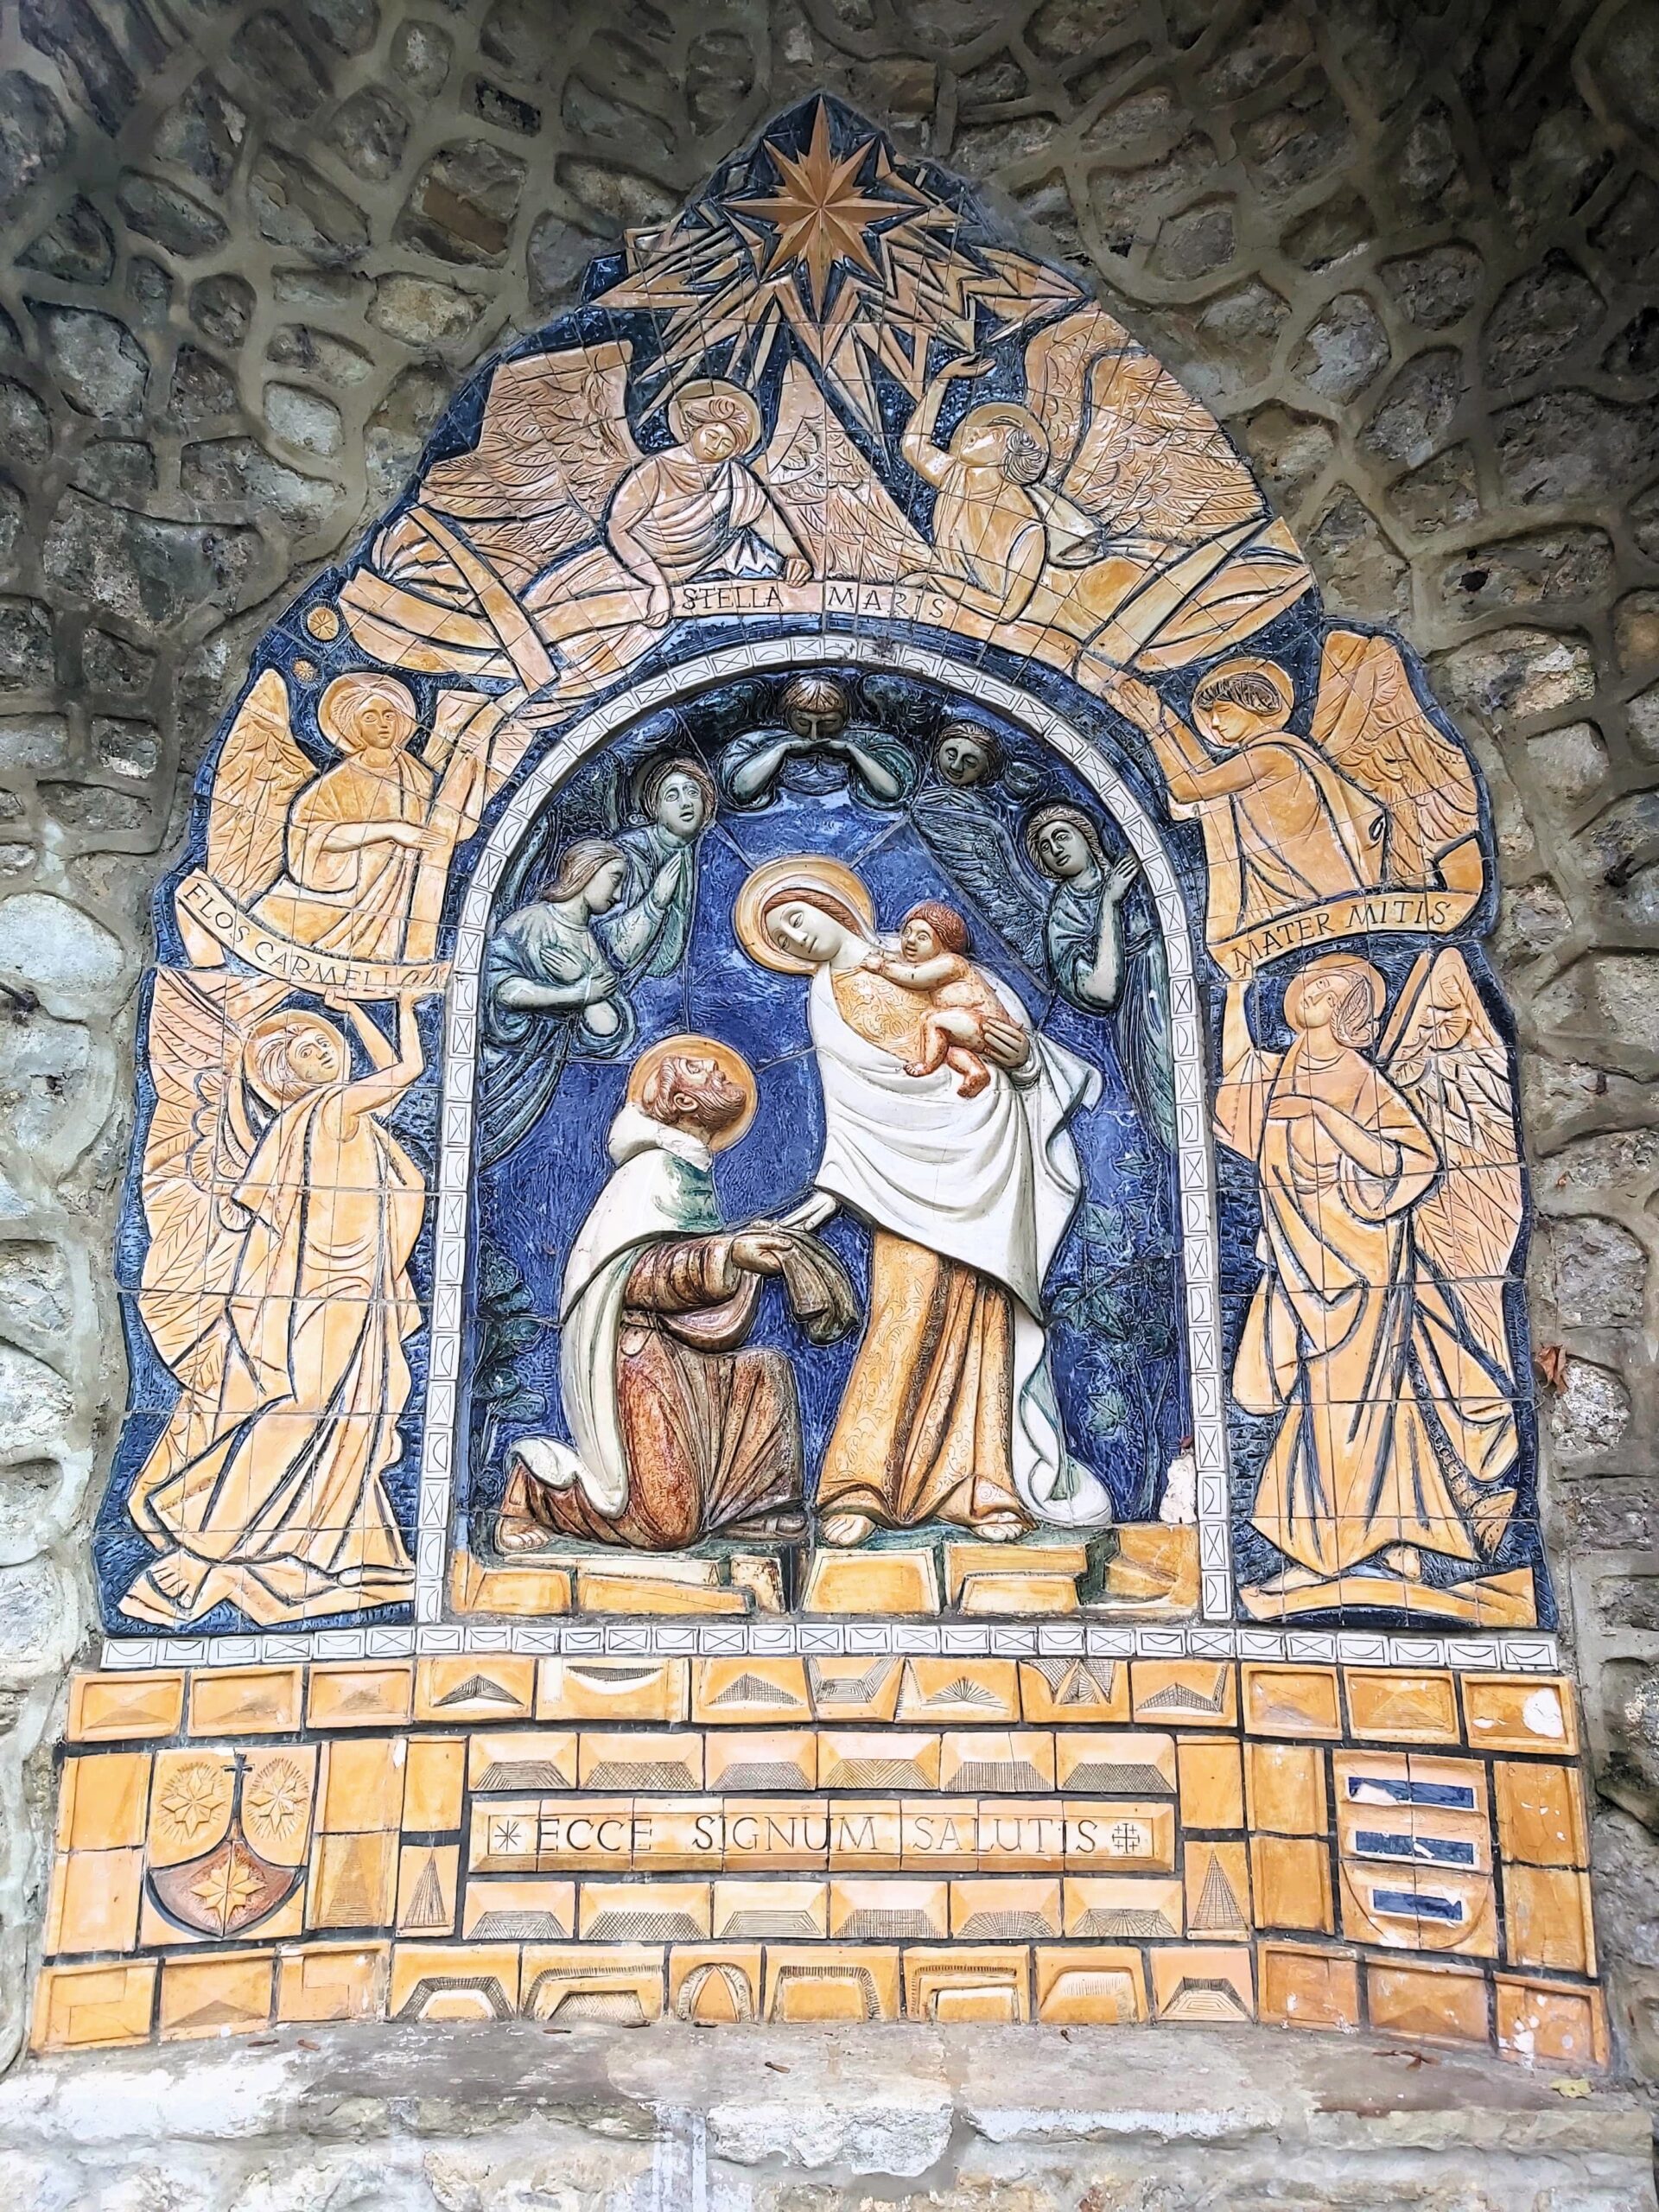 A religious scene in The Friars Aylesford Priory, Kent, England